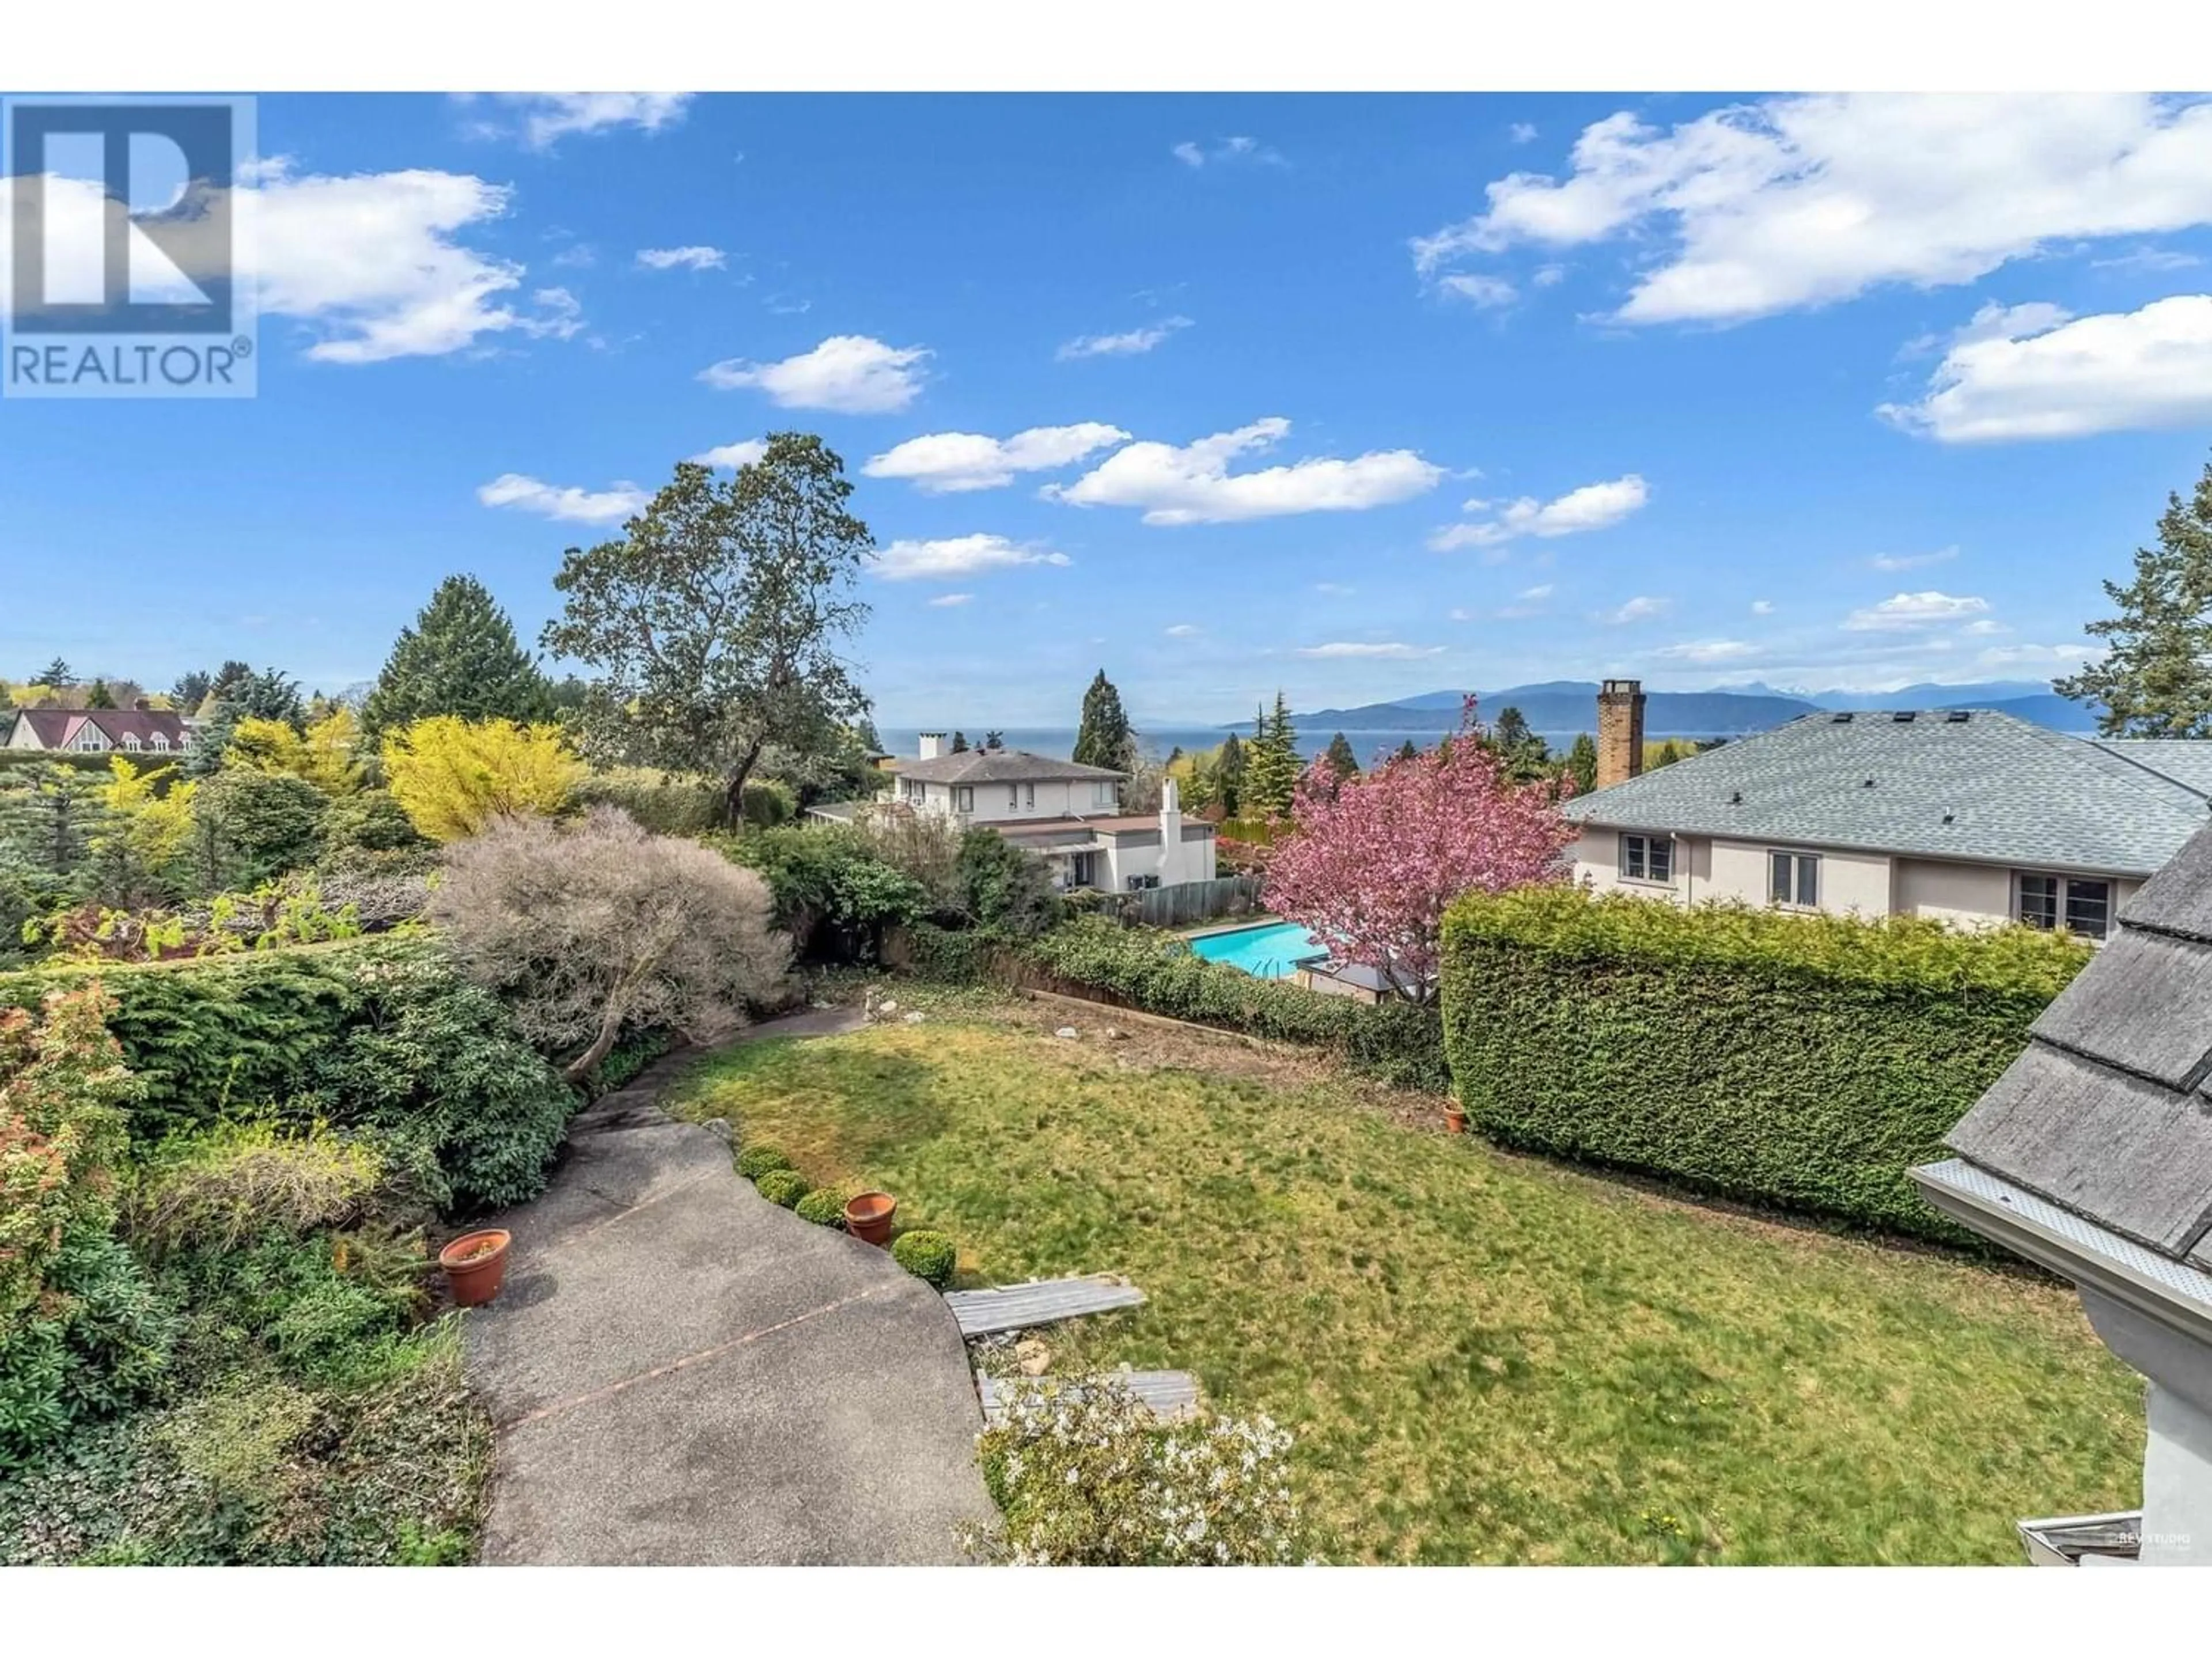 Lakeview for 1529 WESTERN CRESCENT, Vancouver British Columbia V6T1V2